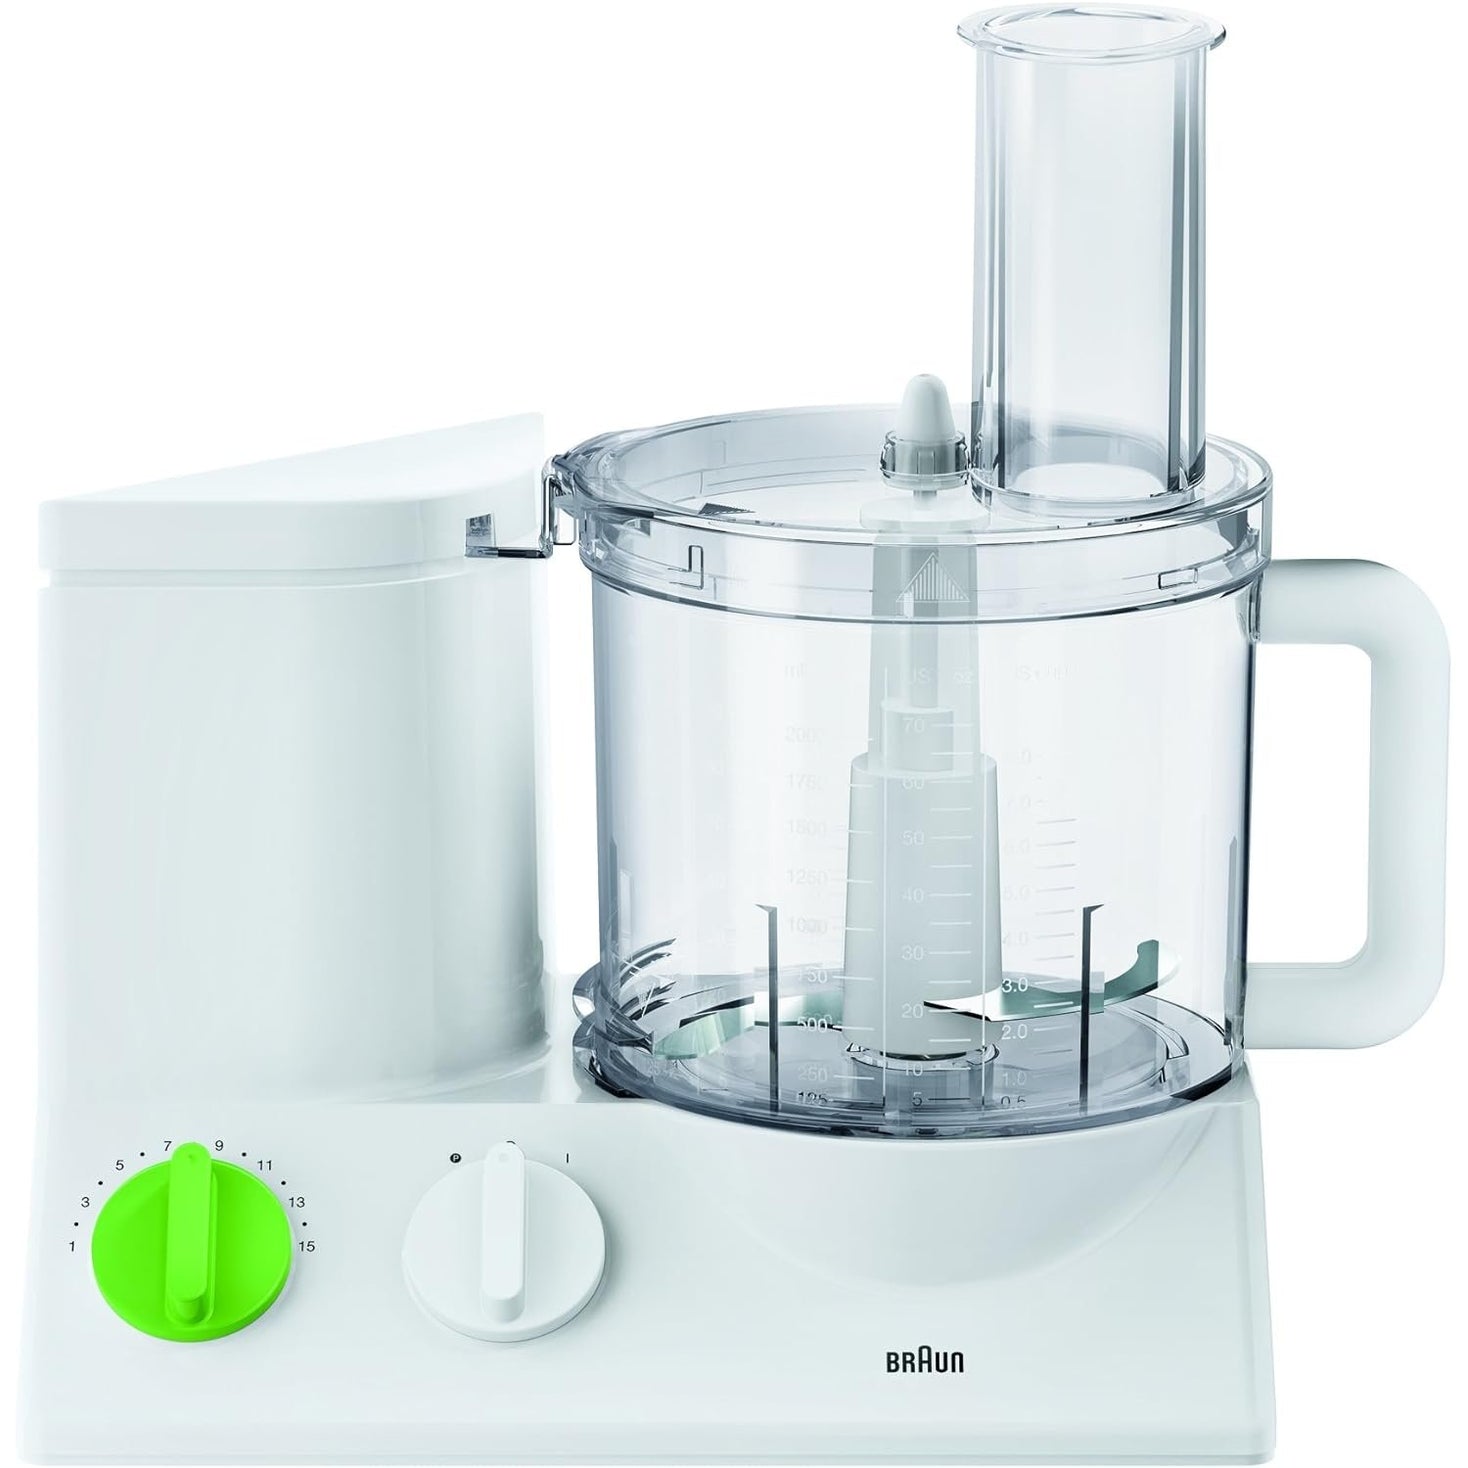 Braun Food Processor 600W - FP3010 | Supply Master Accra, Ghana Kitchen Appliances Buy Tools hardware Building materials